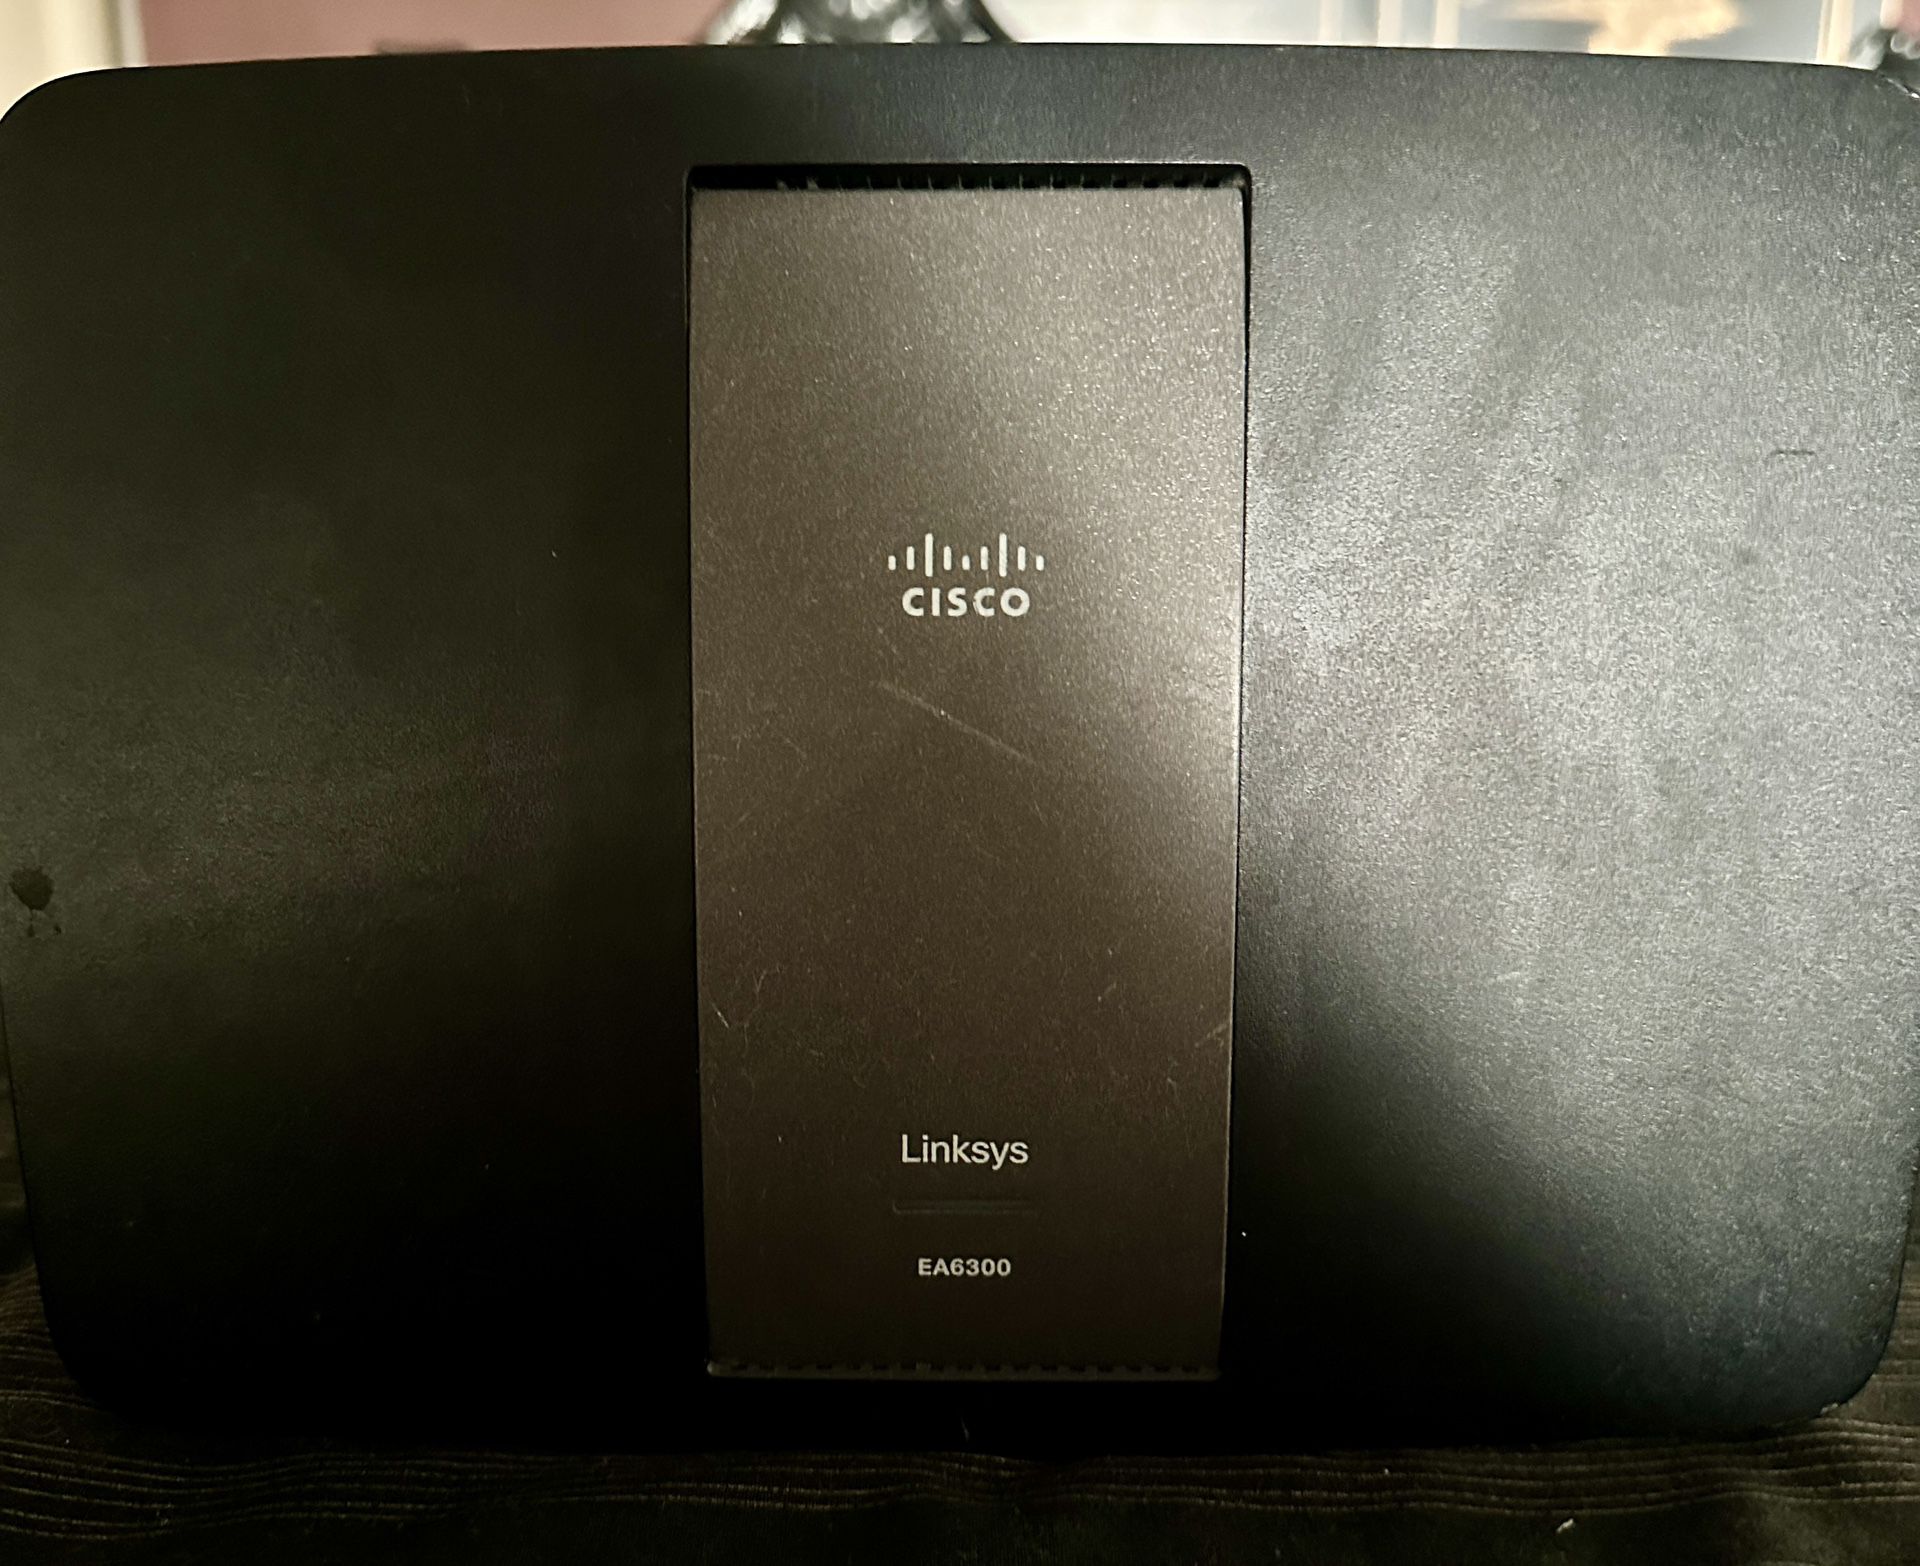 Cisco Linksys Dual Band WiFi Router